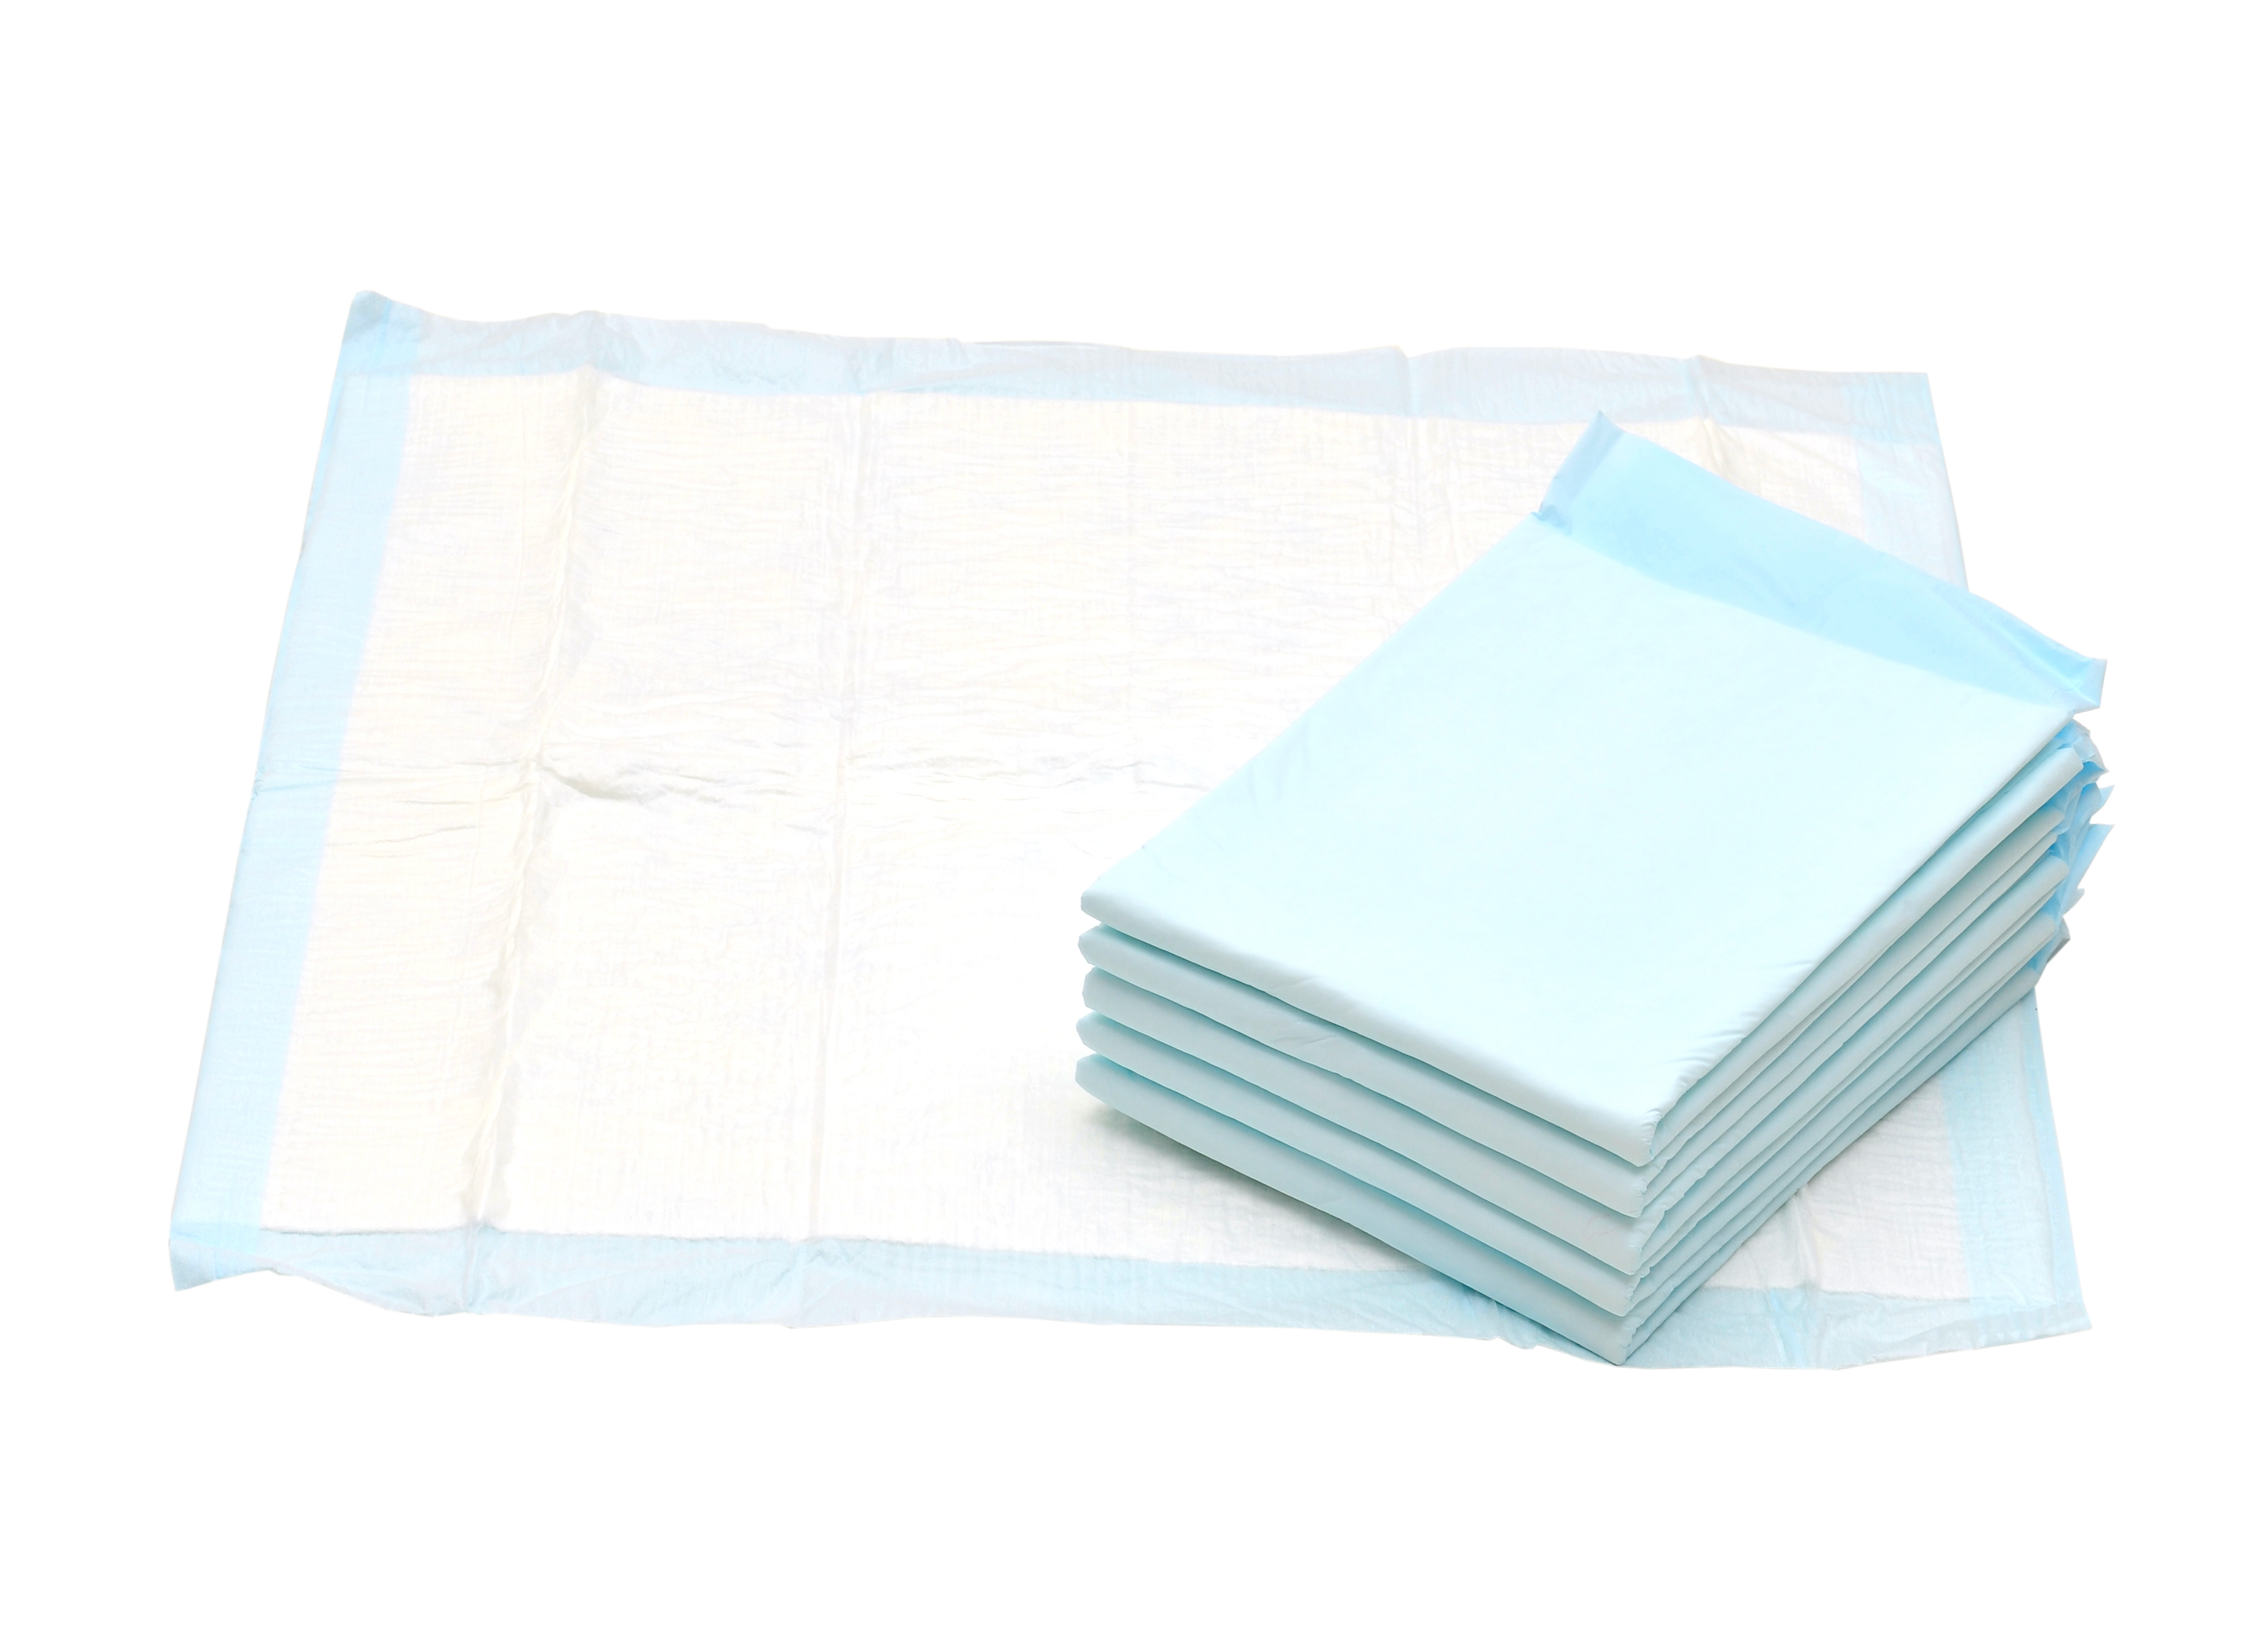 UP60X90 Romed underpads, 60x90cm, 10 pcs in a polybag, 20 x 10 pcs, 200 pcs in a carton.